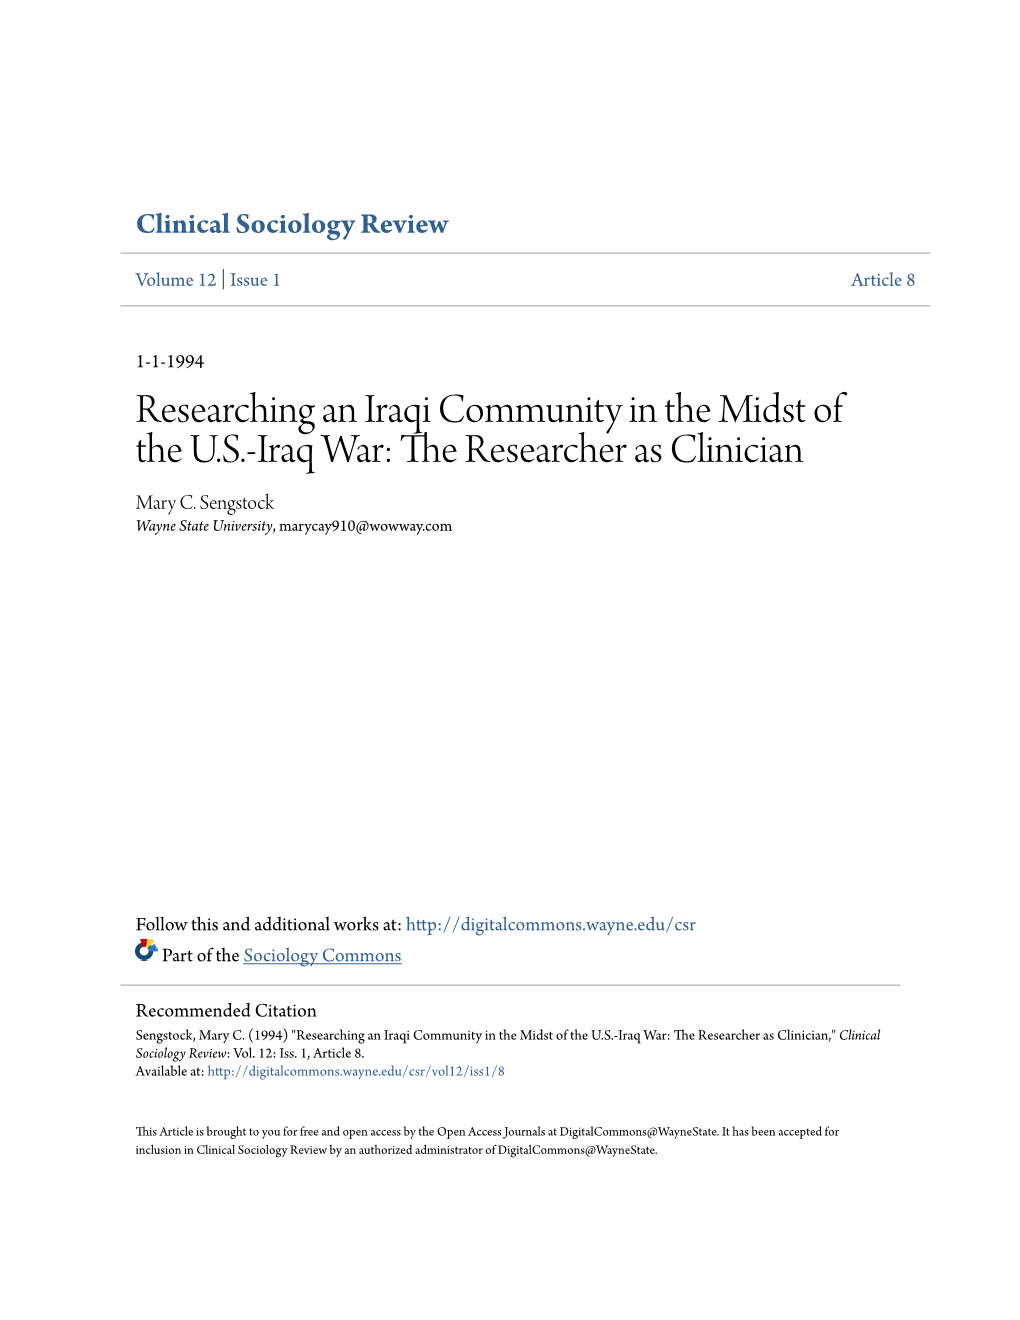 Researching an Iraqi Community in the Midst of the US-Iraq